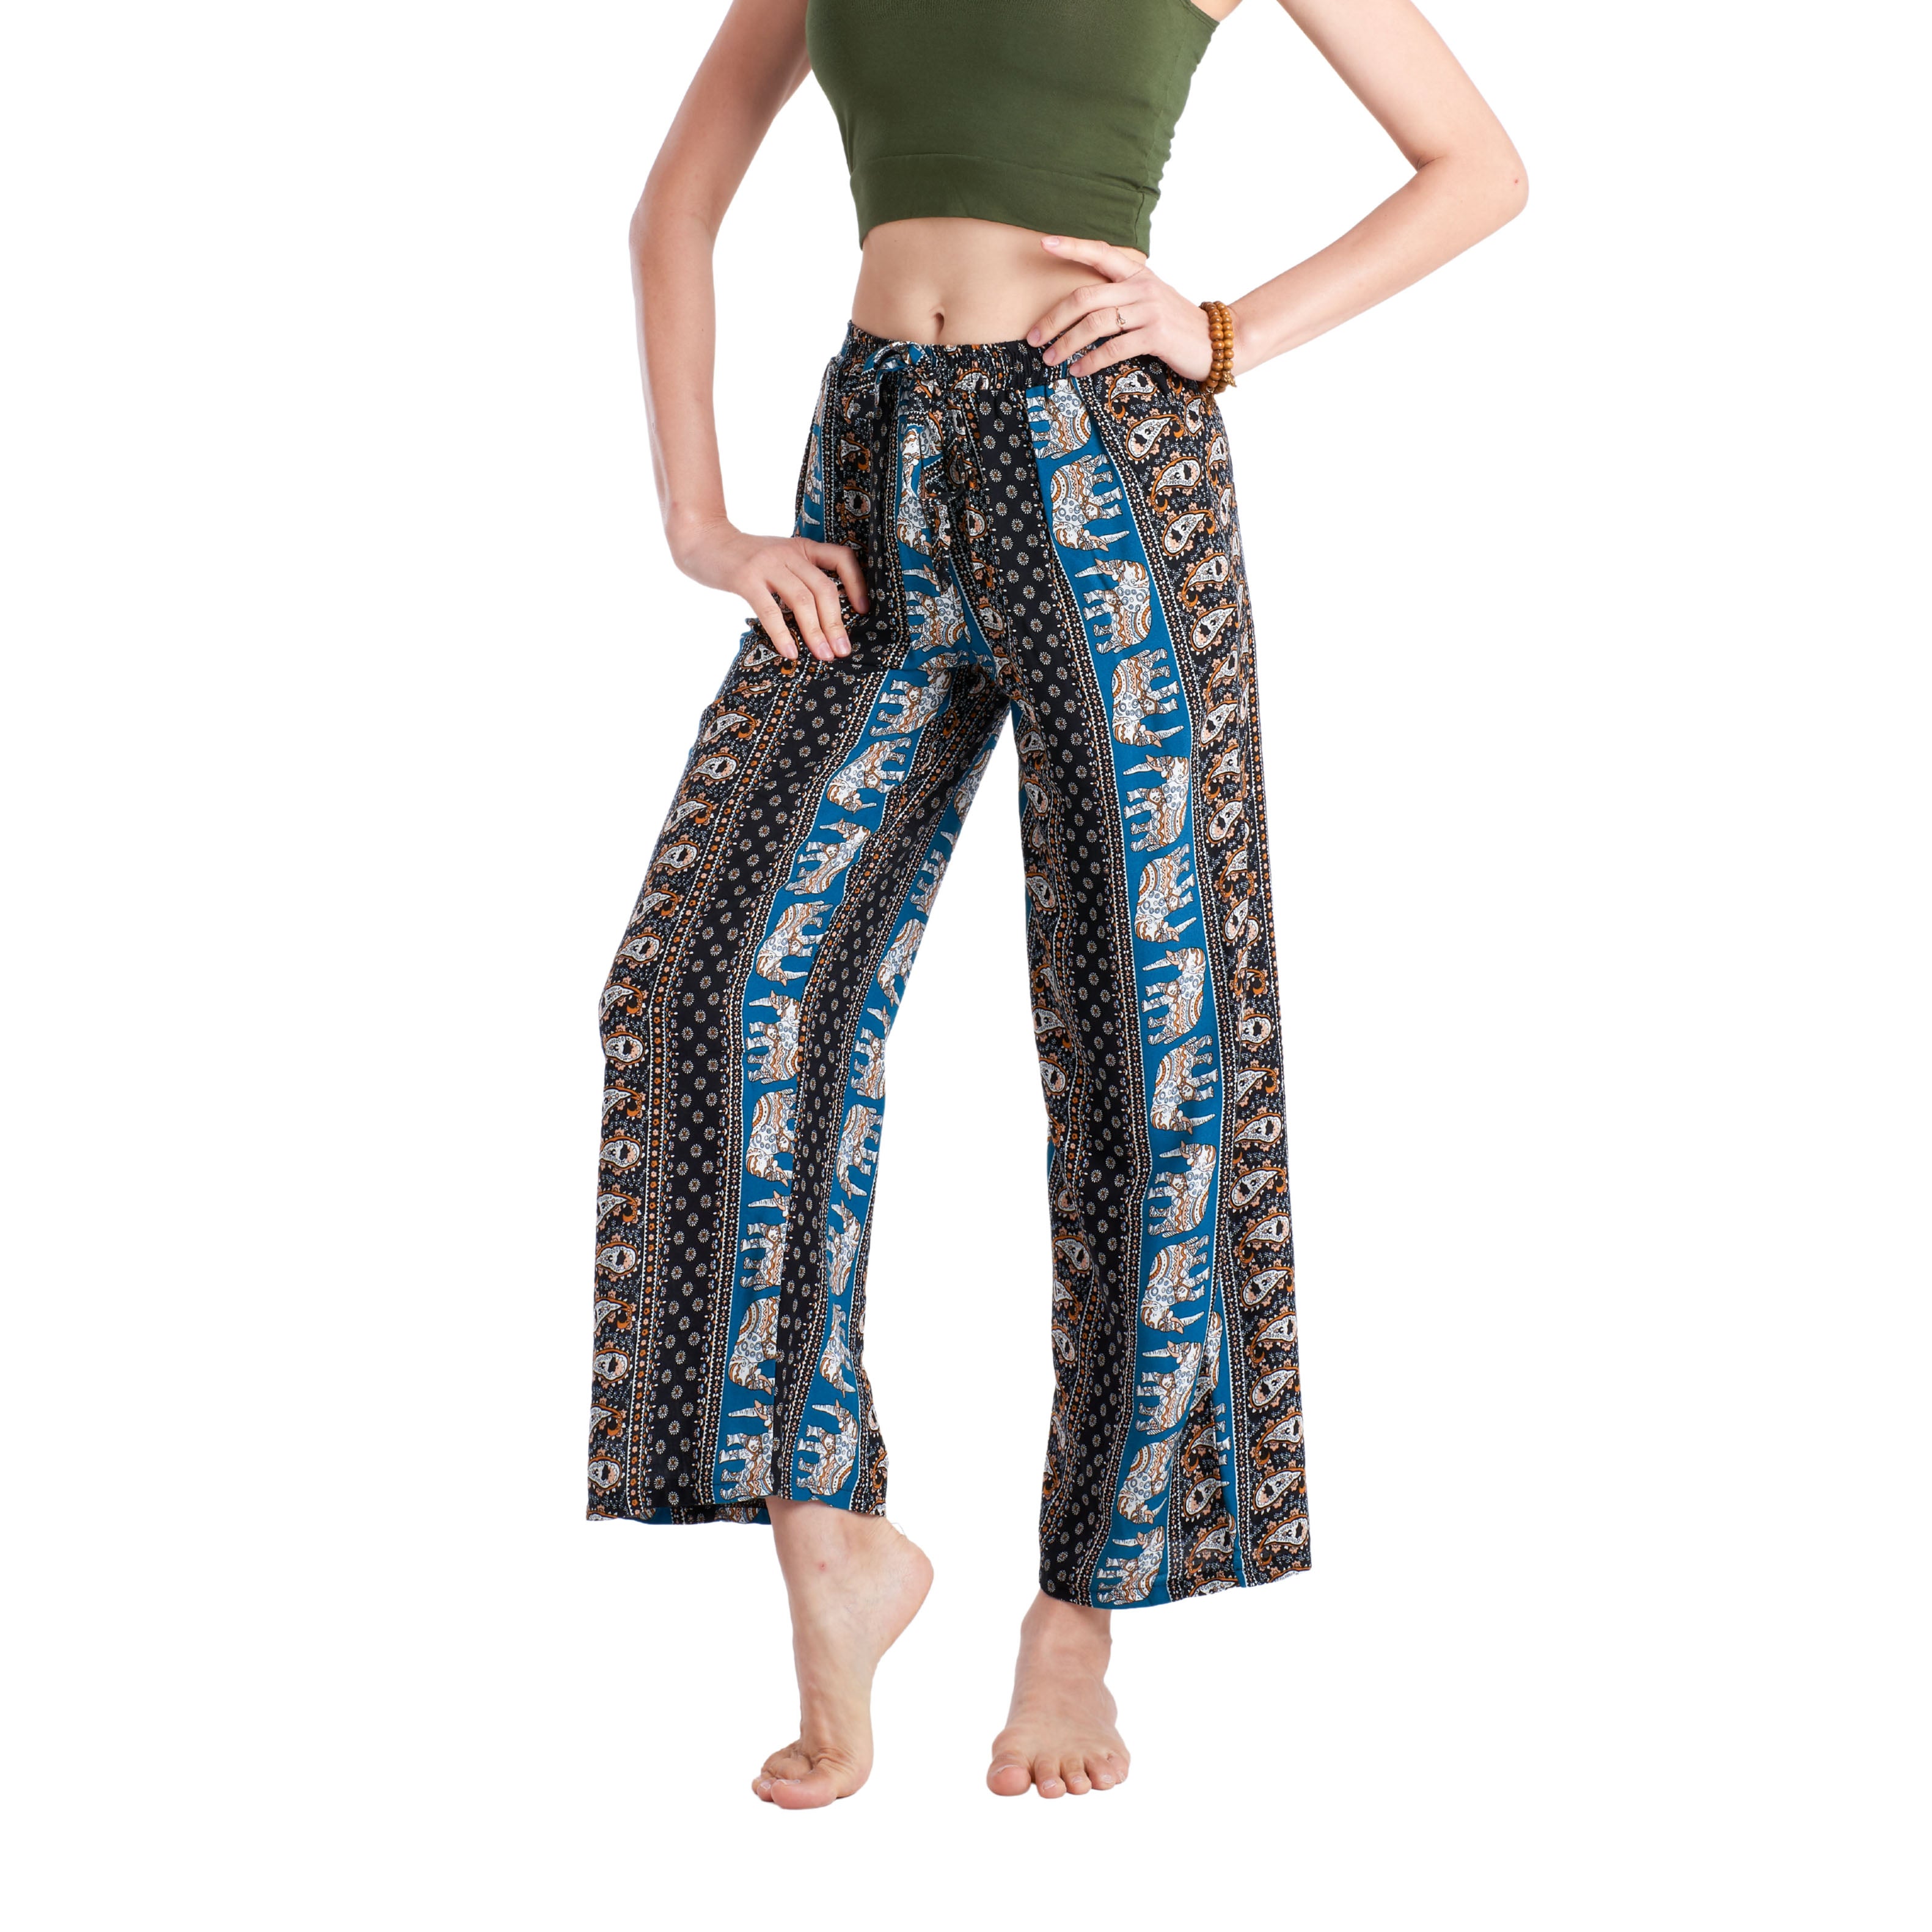 NAGPUR PANTS Elepanta Casual Pants - Buy Today Elephant Pants Jewelry And Bohemian Clothes Handmade In Thailand Help To Save The Elephants FairTrade And Vegan